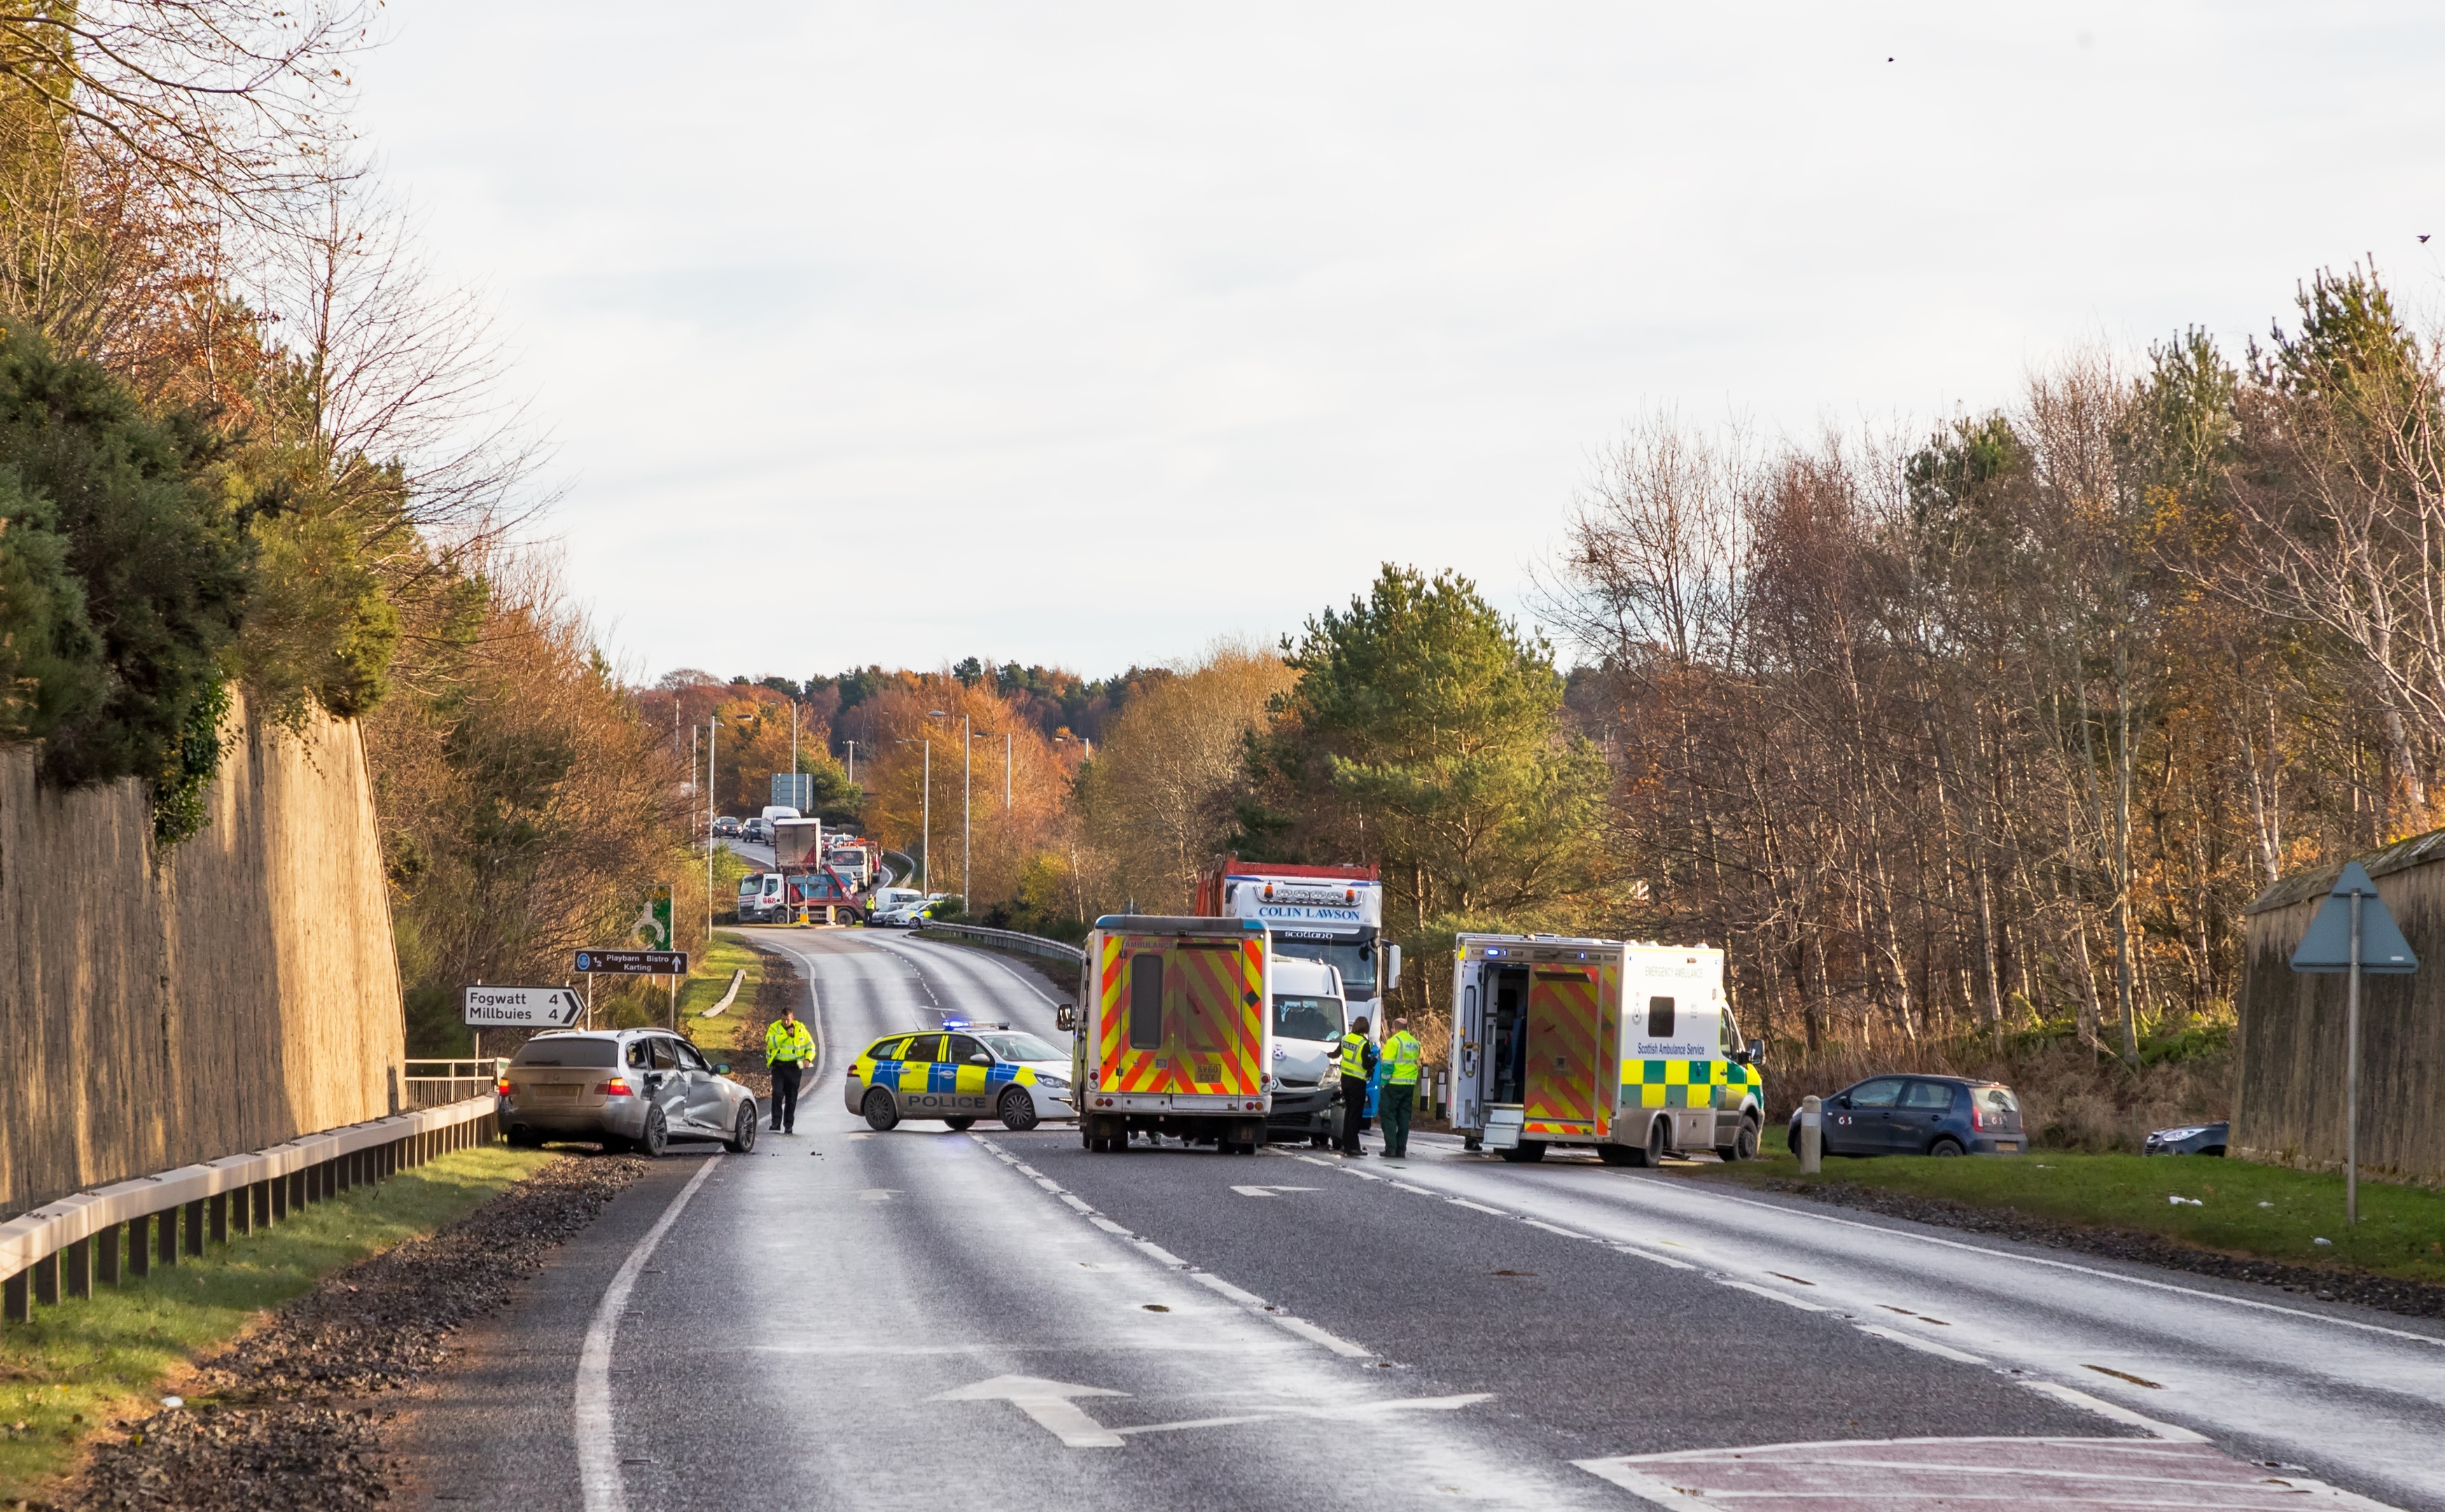 Scene of the crash between an NHS medical bus and a car on the A96